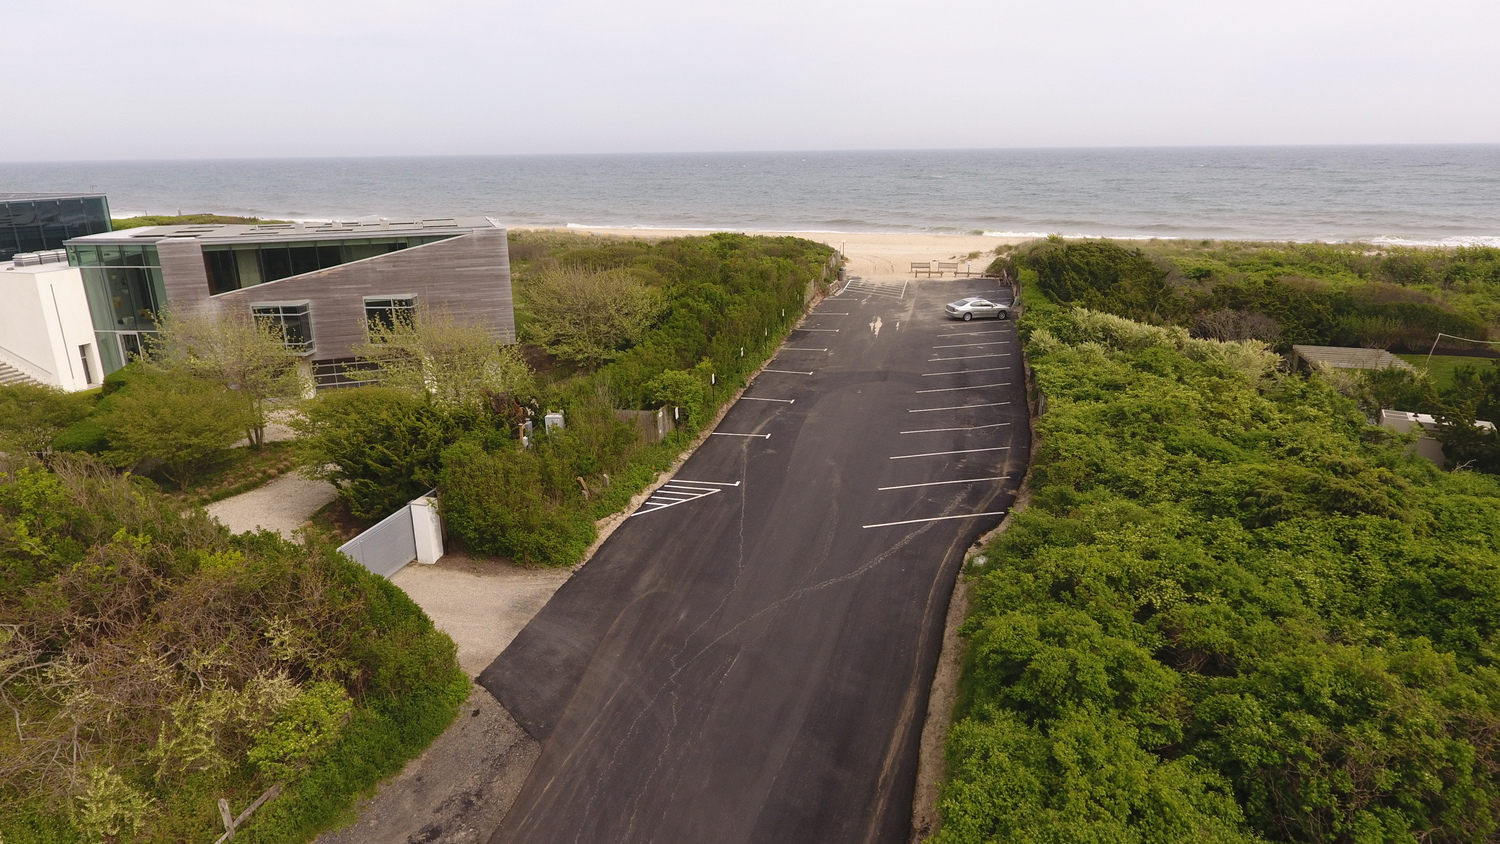 The installation of the power cable for the South Fork Wind Farm has been concluded and Beach Lane repaved, following a winter in which drilling equipment took up most of the street.